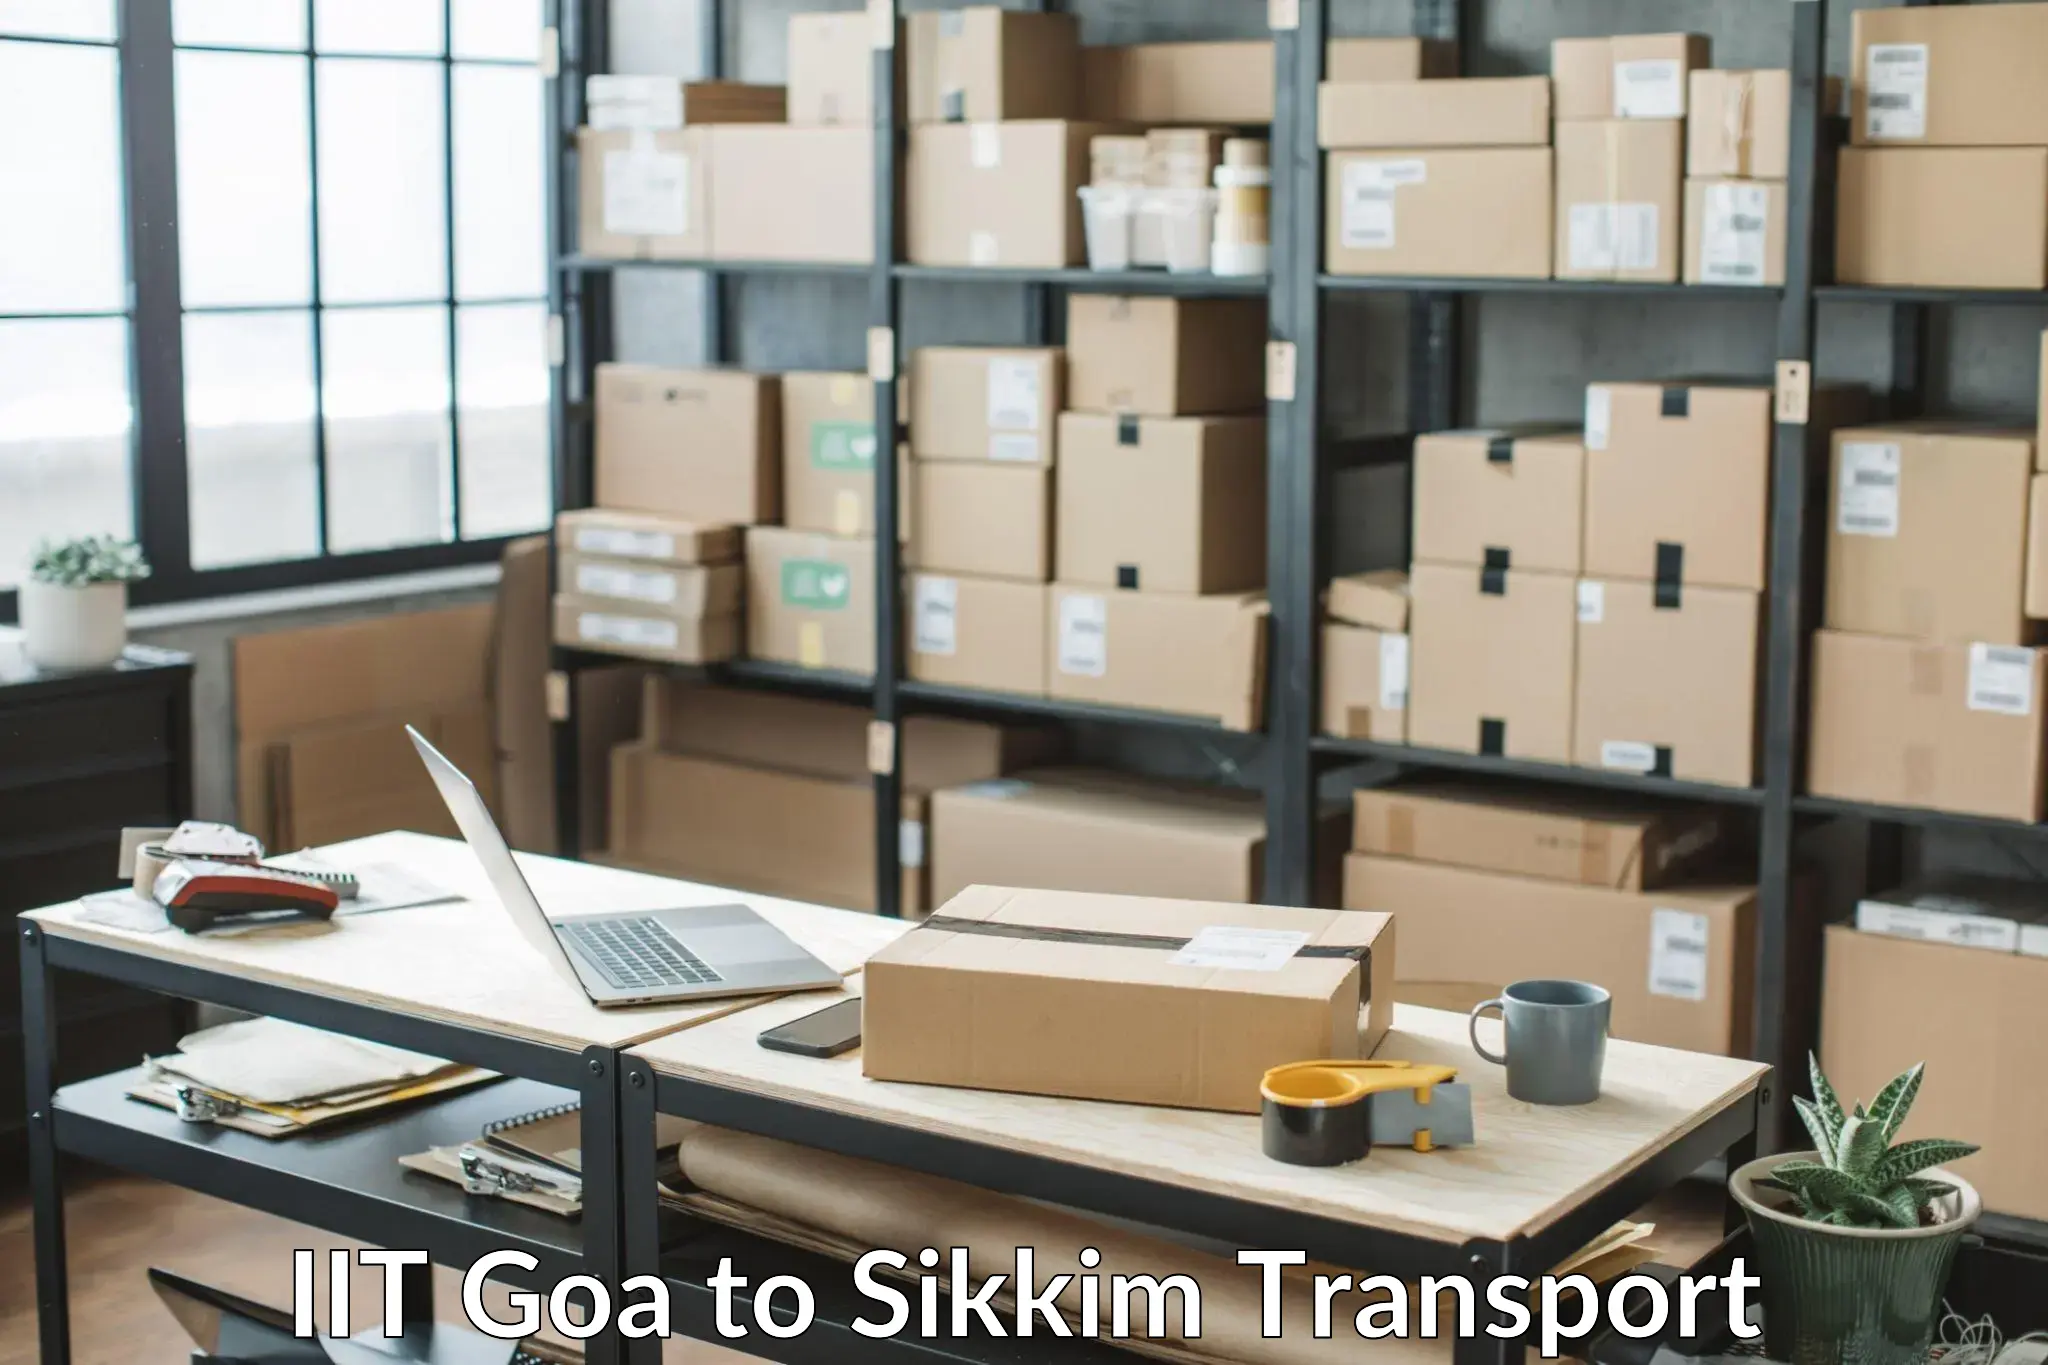 Container transport service IIT Goa to South Sikkim